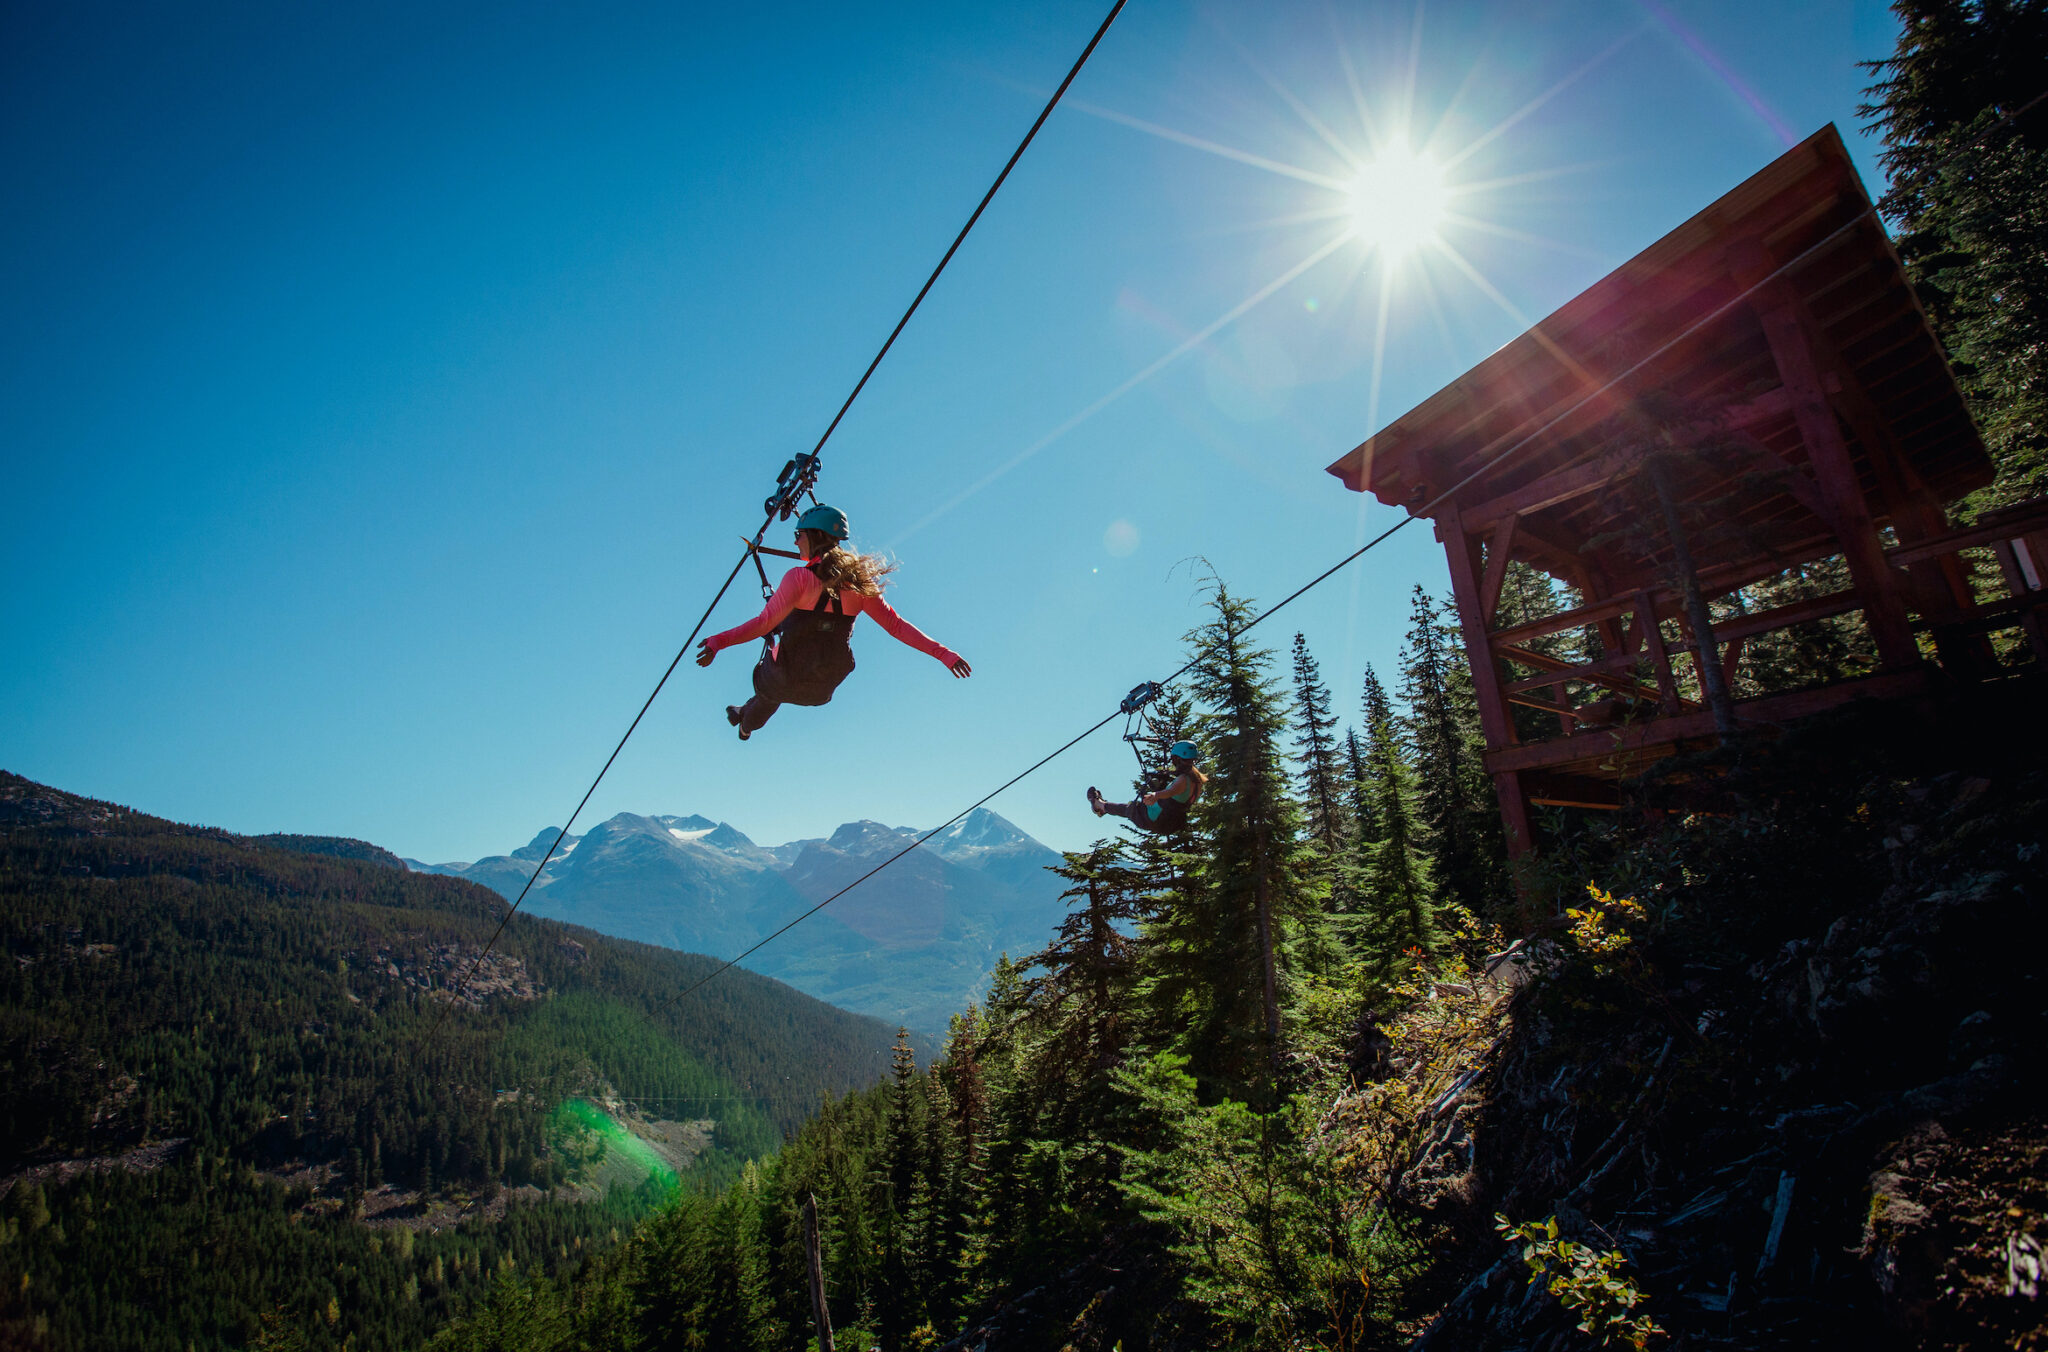 A zipliner soaring above the trees on a sunny day in Whistler.